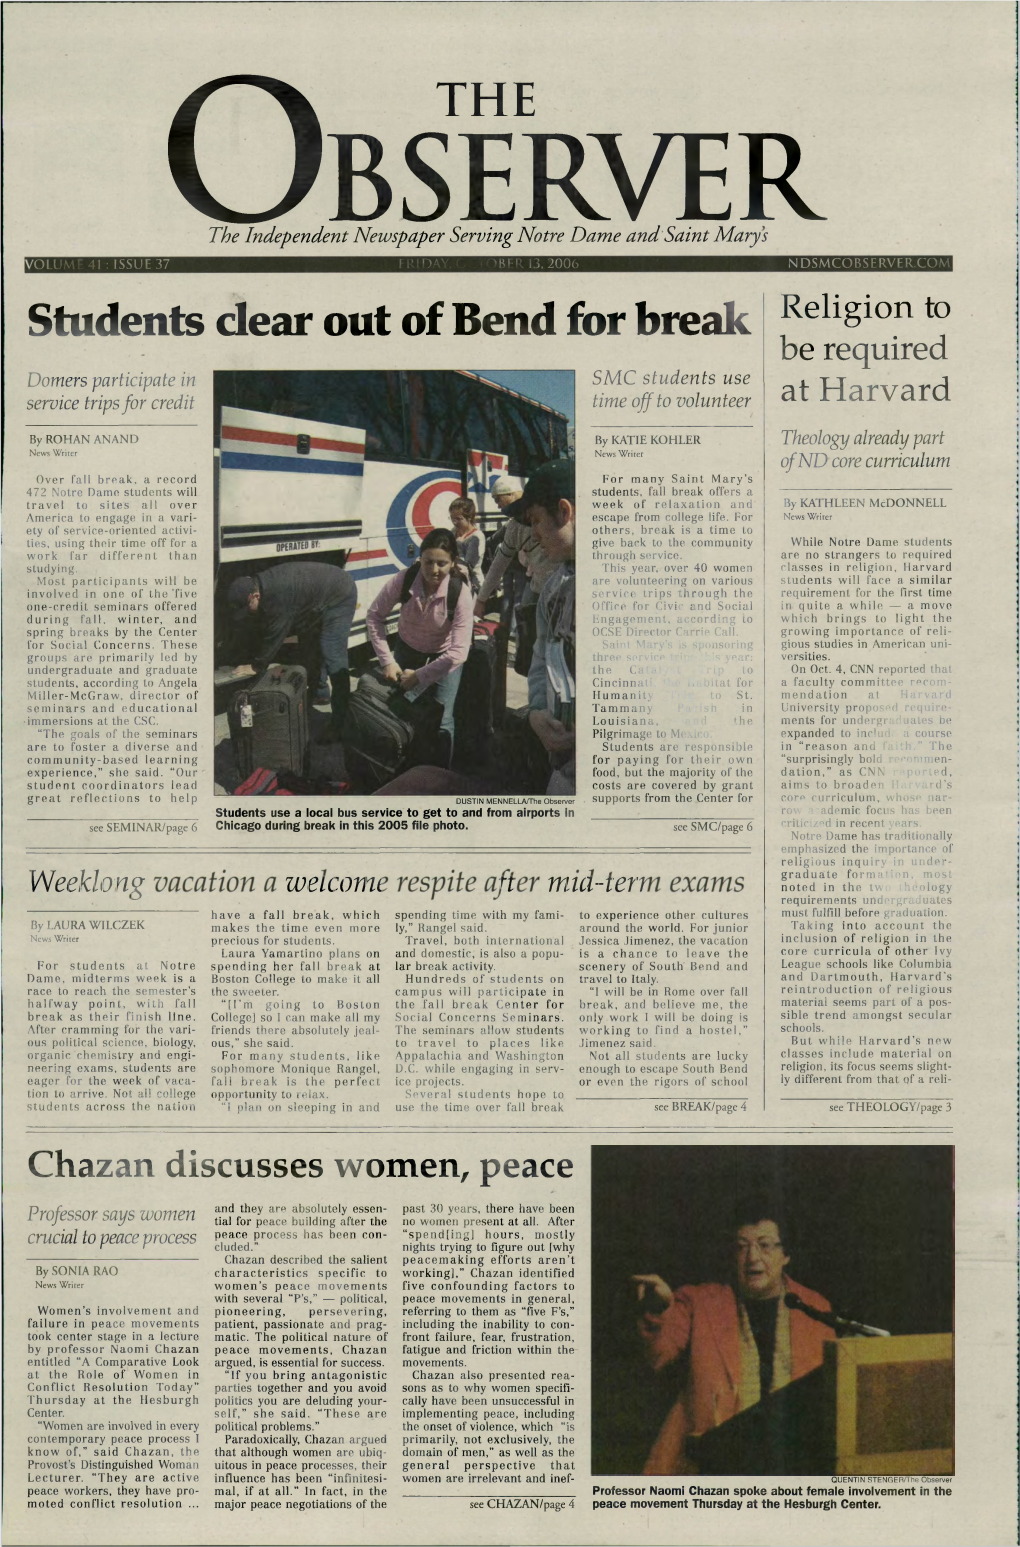 Students Dear out of Bend for Break Religion to Be Required Domers Participate in SMC Students Use Service Trips for Credit Time Off to Volunteer at Harvard